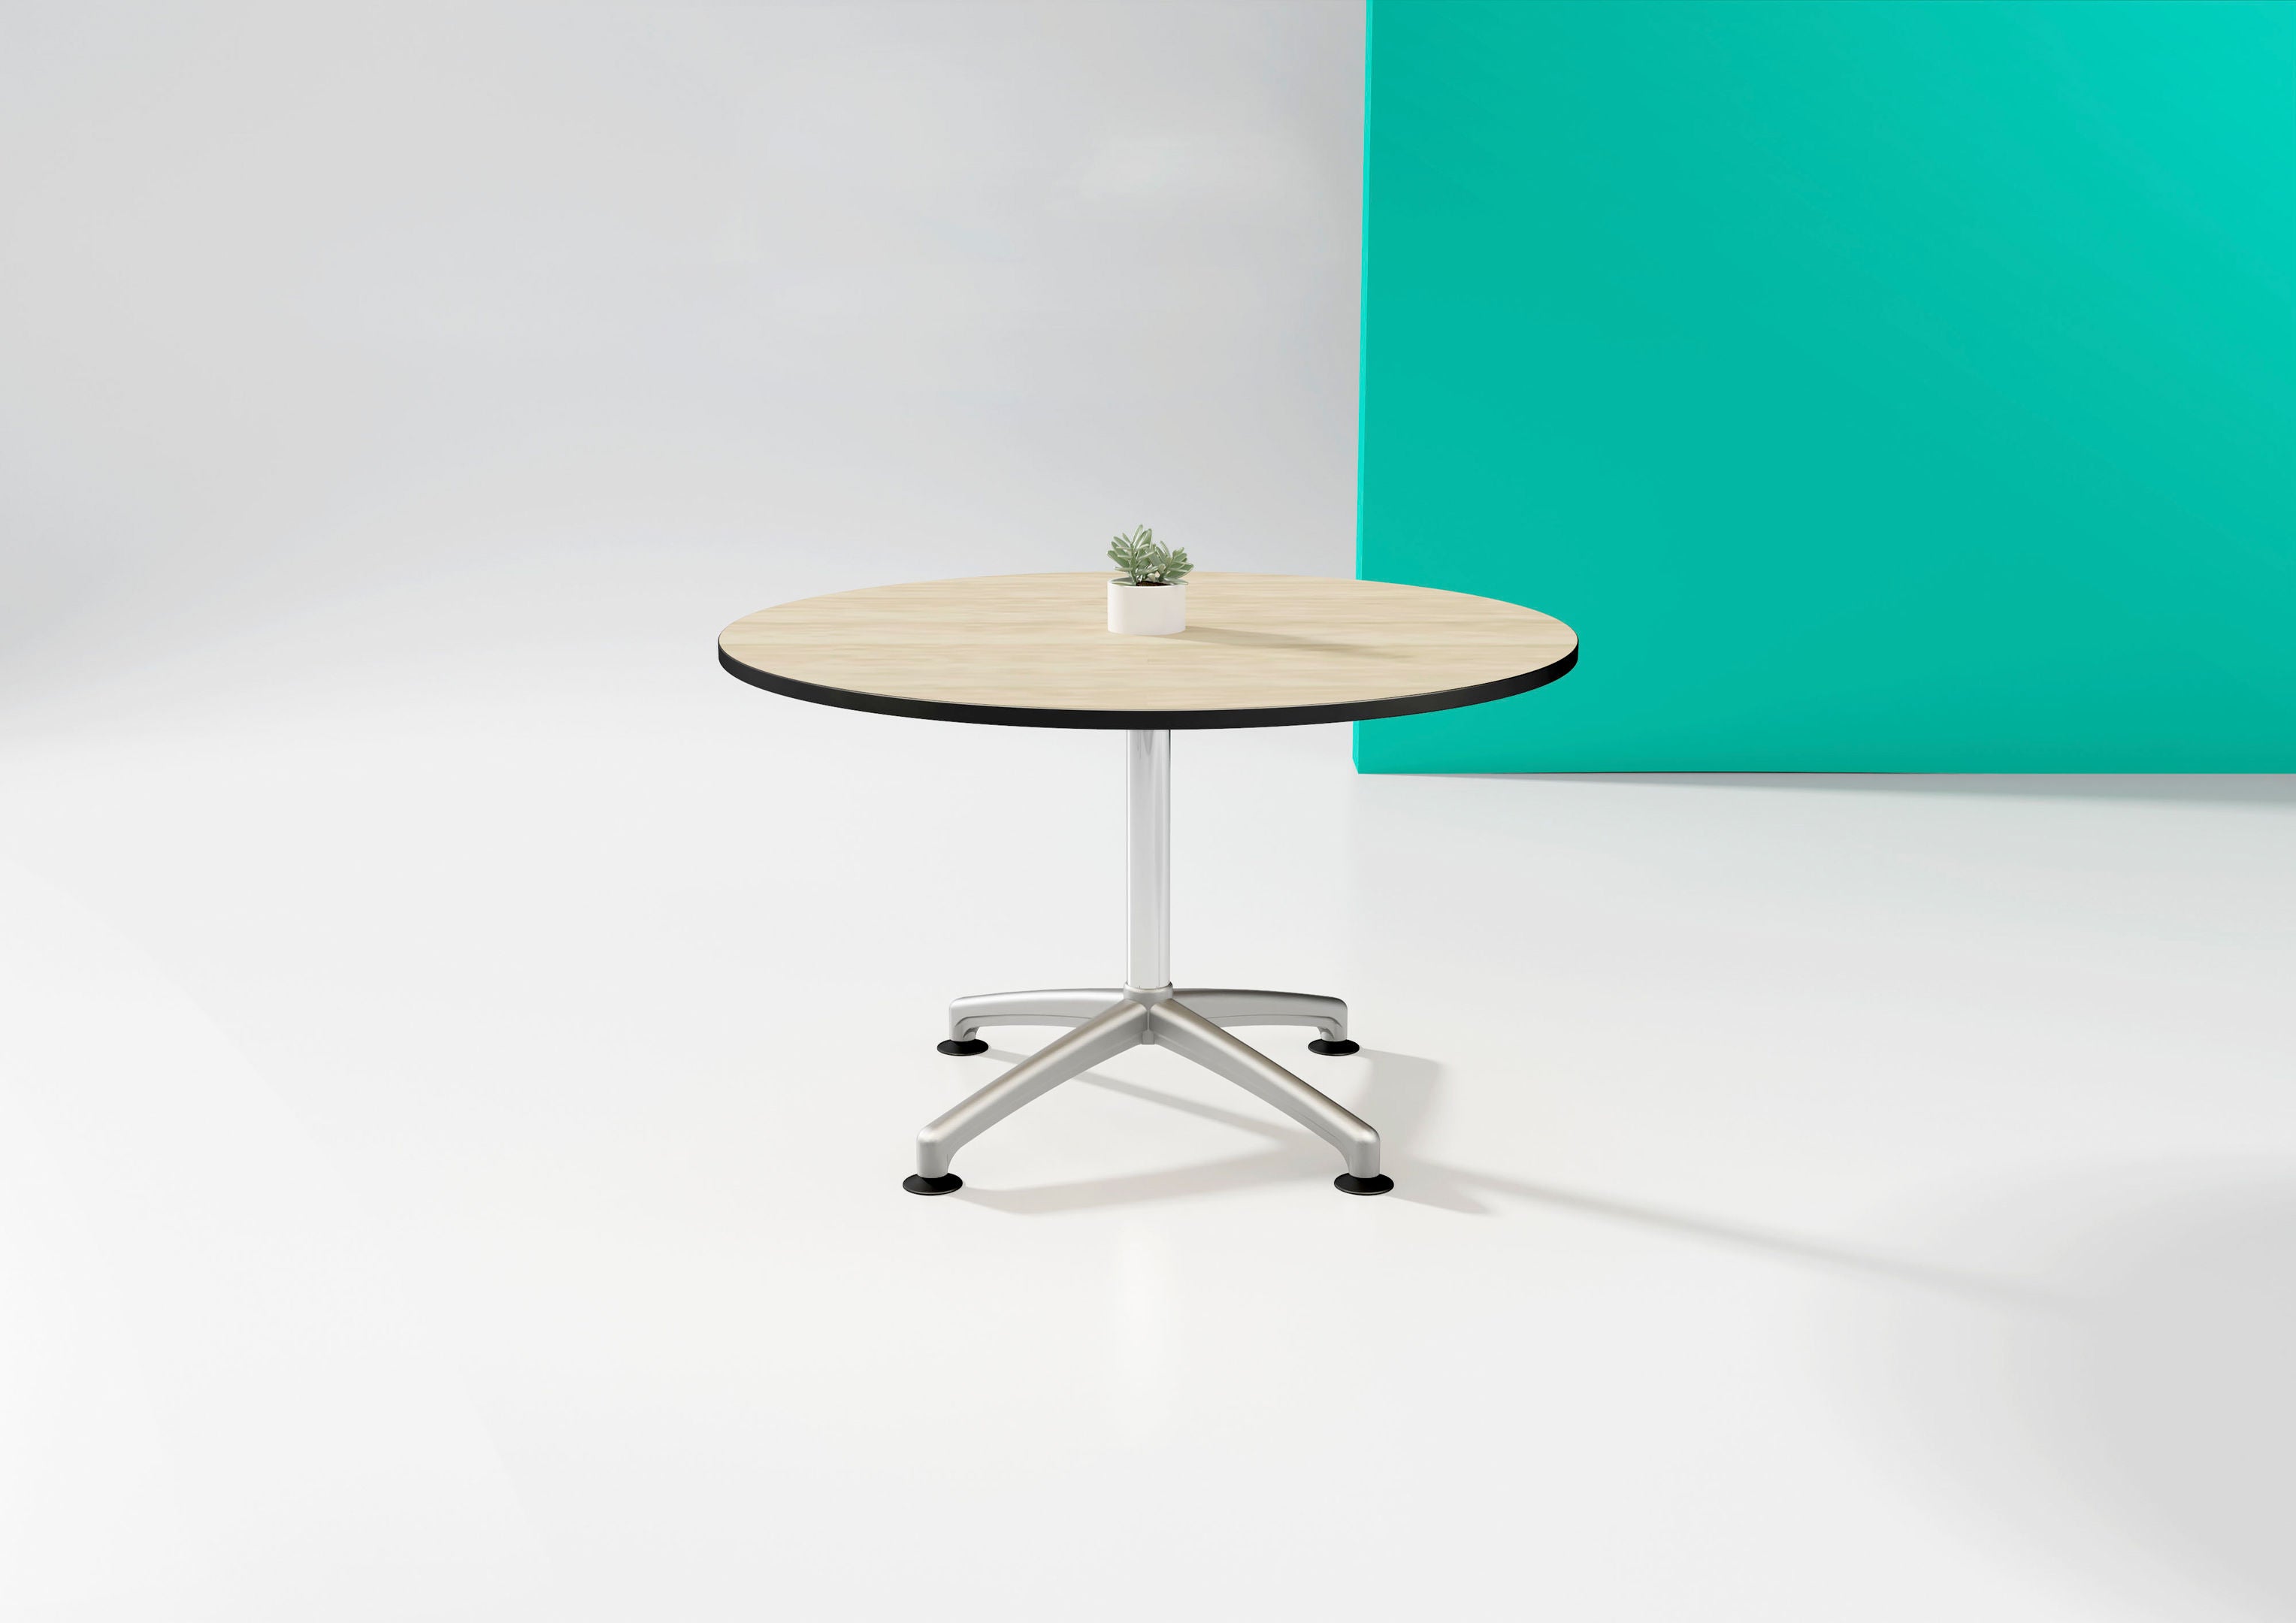 Thinking Works i AM Meeting Table